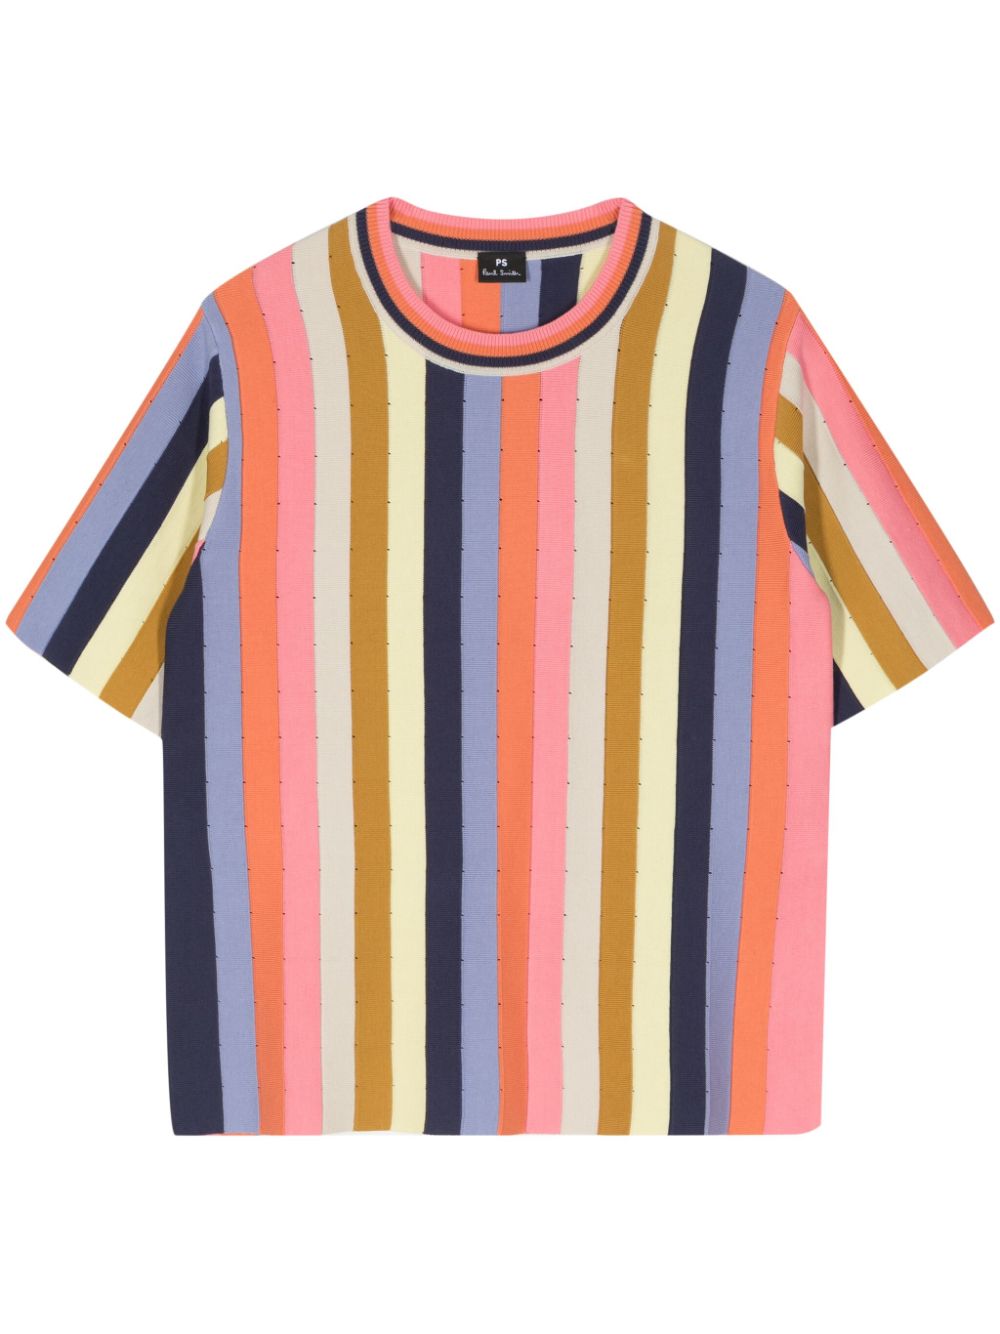 PS Paul Smith striped knitted top - Rosa von PS Paul Smith